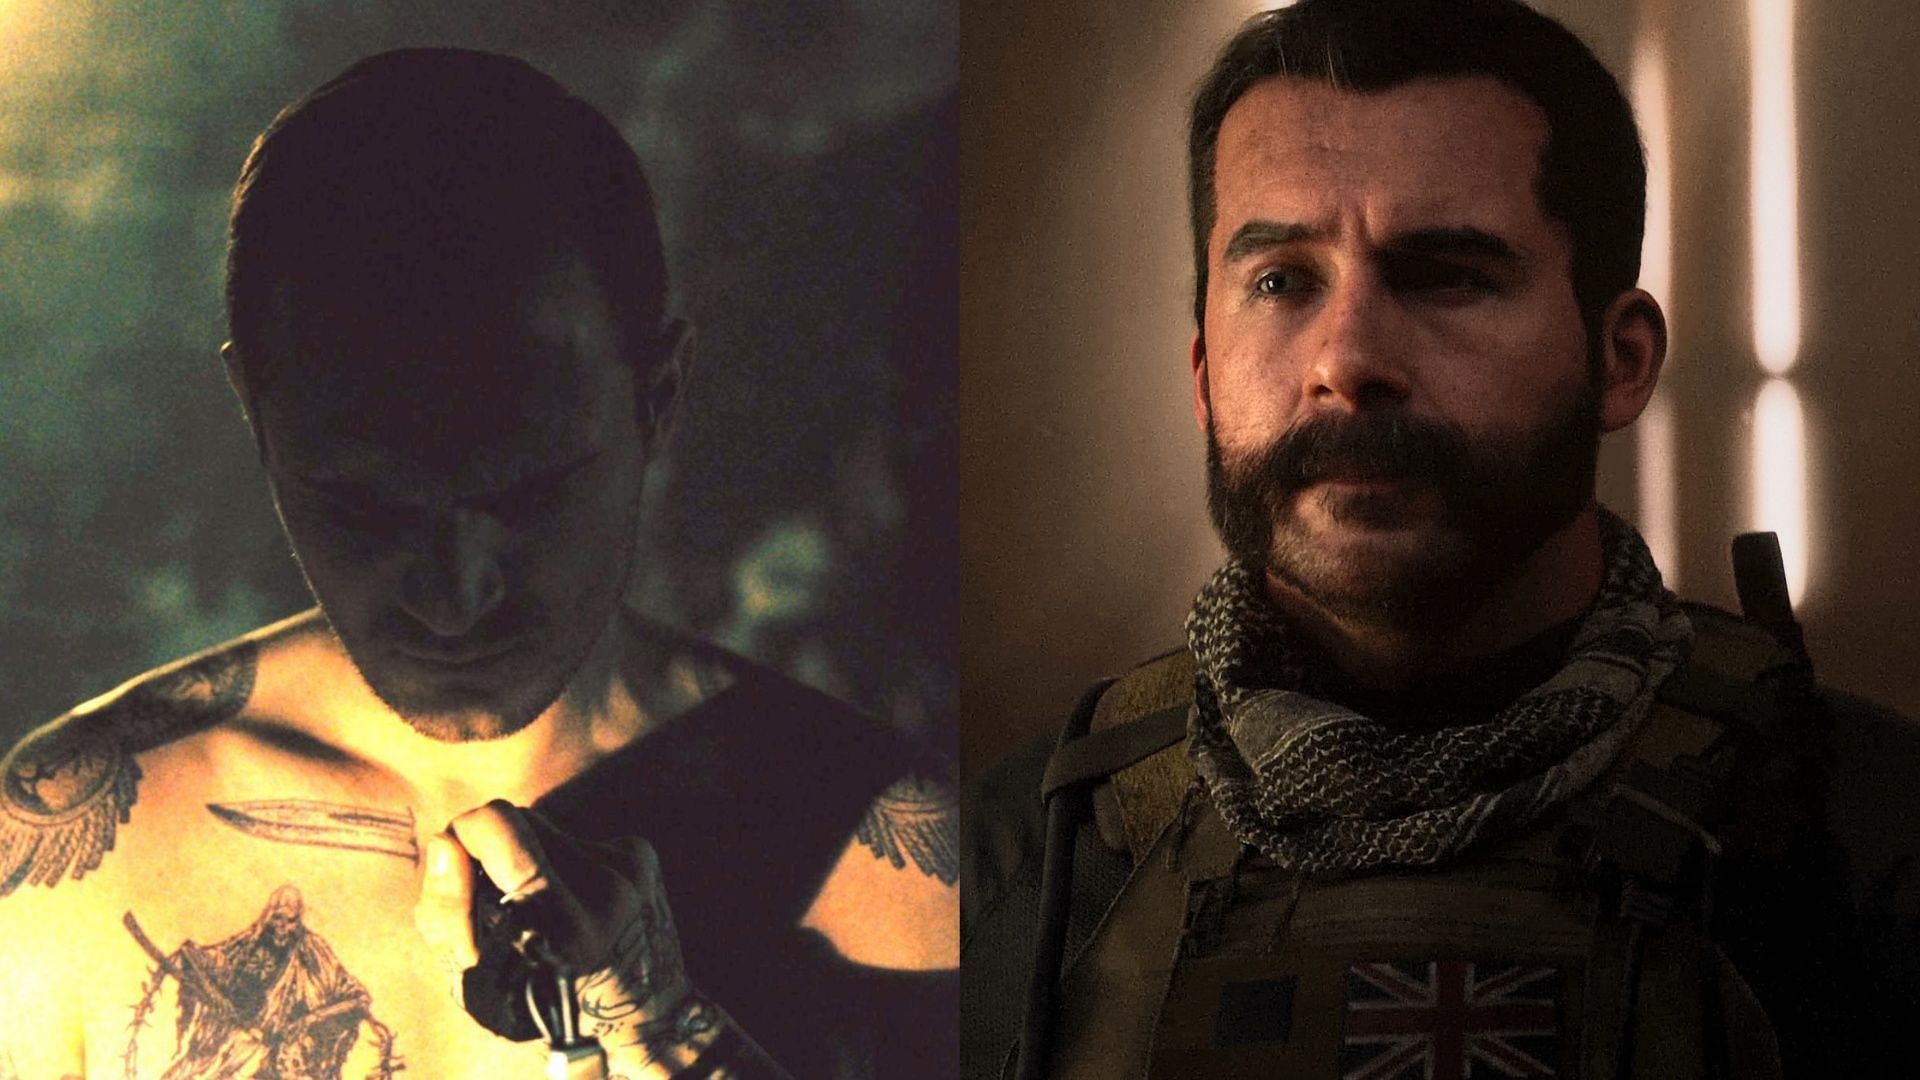 Makarov in Modern Warfare 3 on the left and Captain Price on the right in MW2.